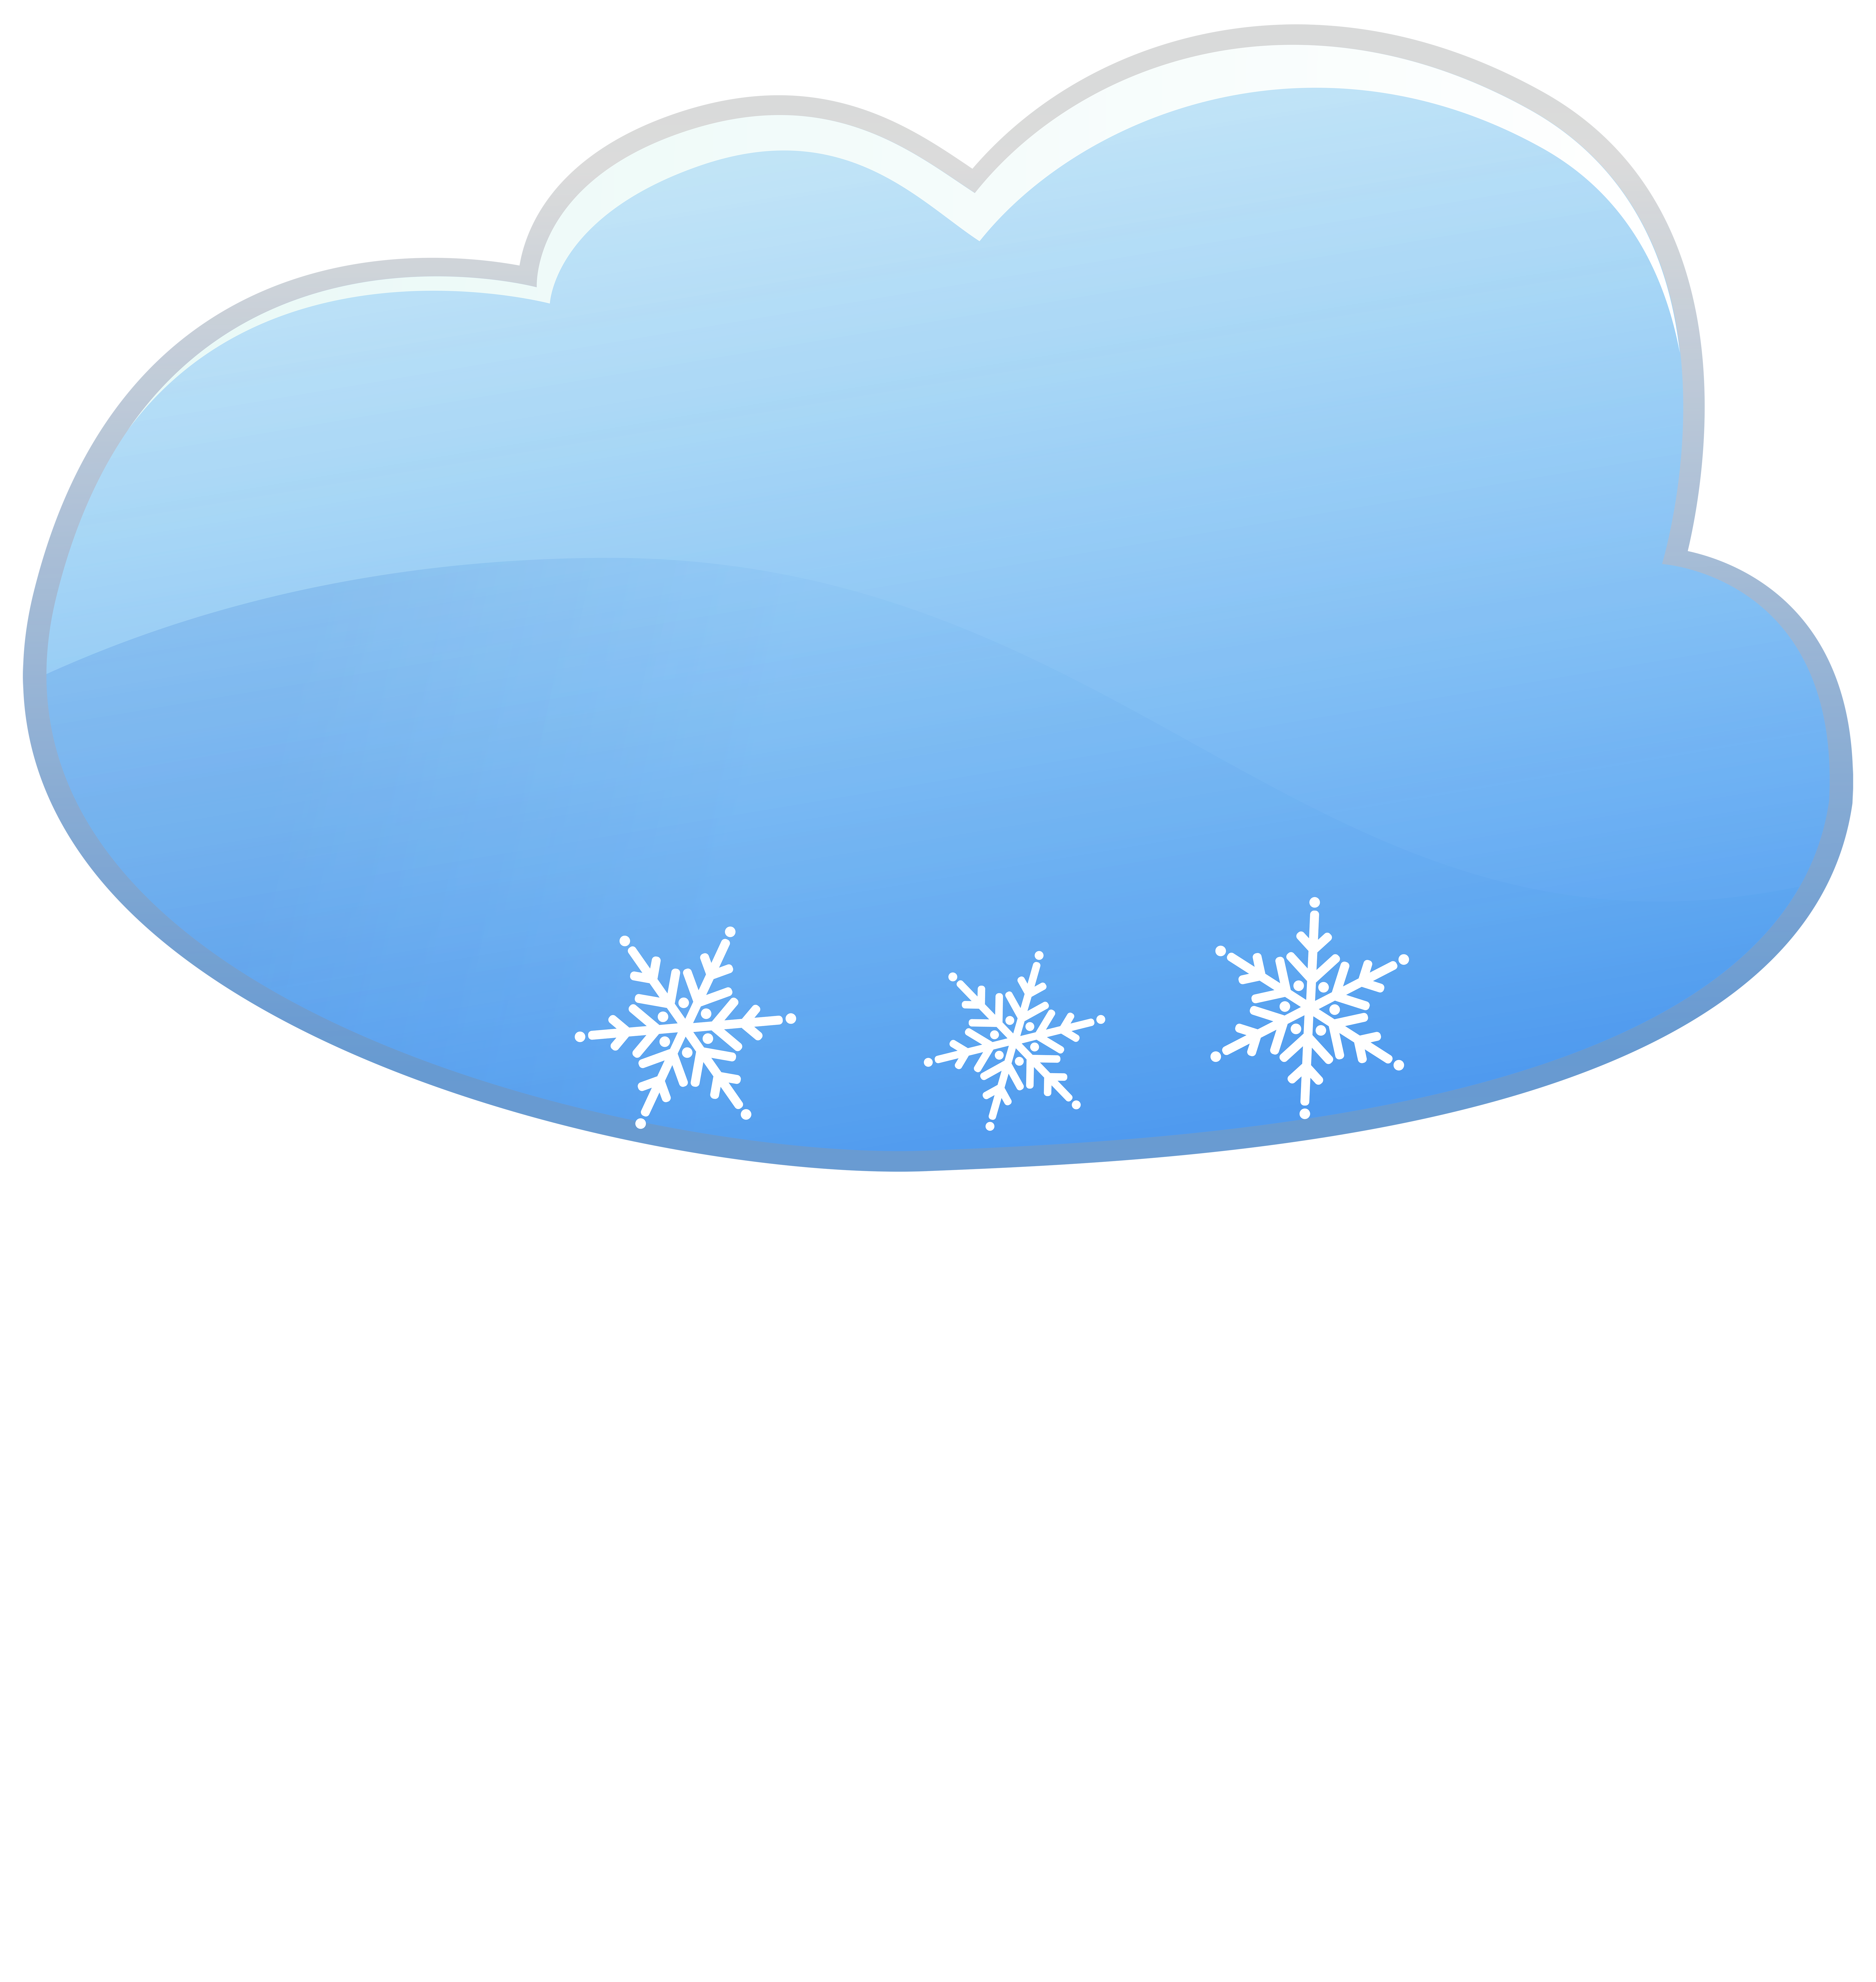 snowy weather icons